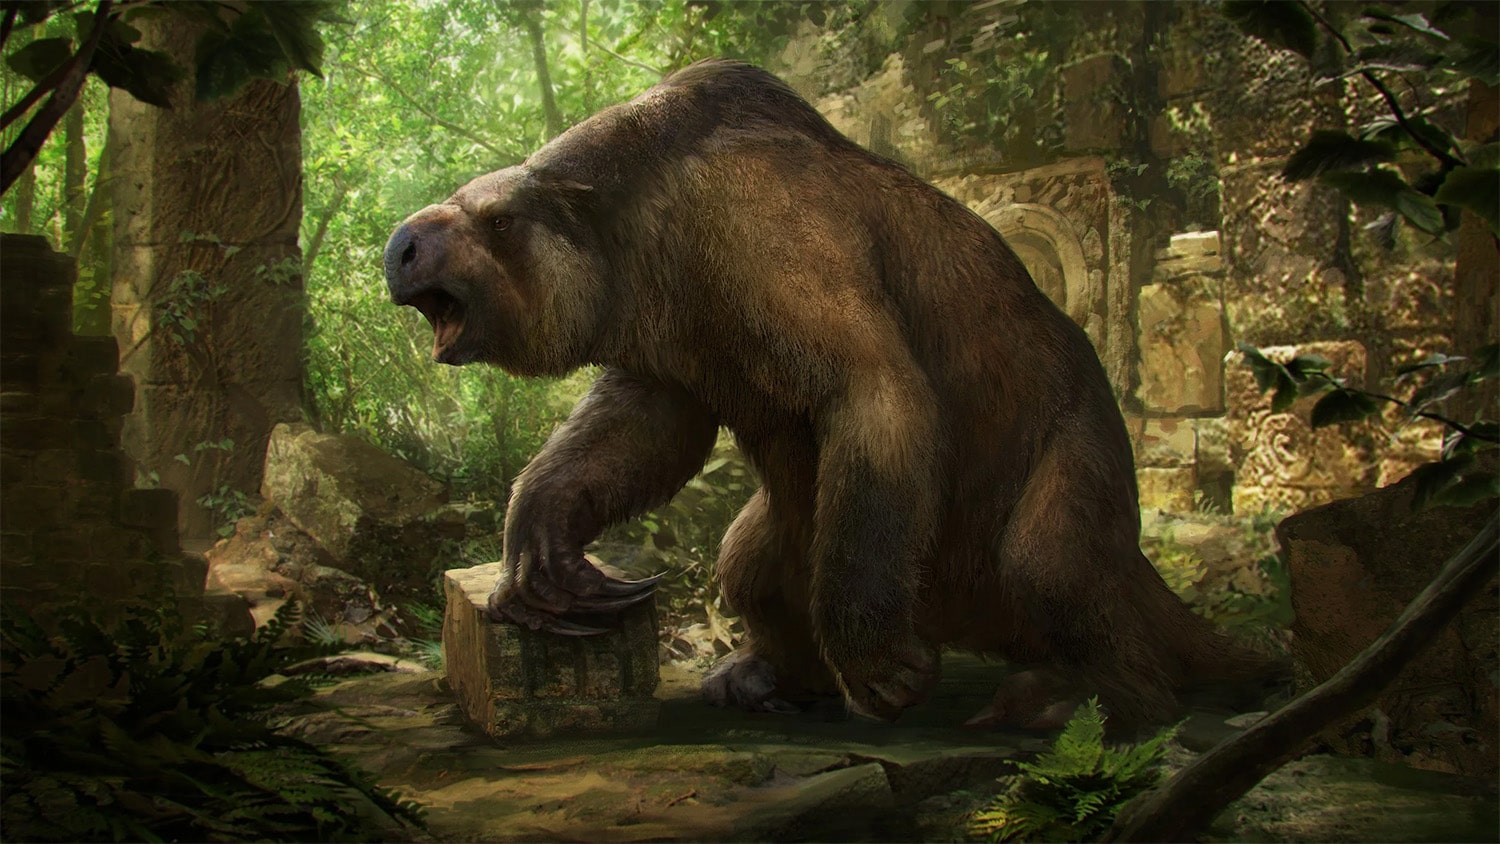 17 interesting facts about Megatherium (Giant Ground Sloth)